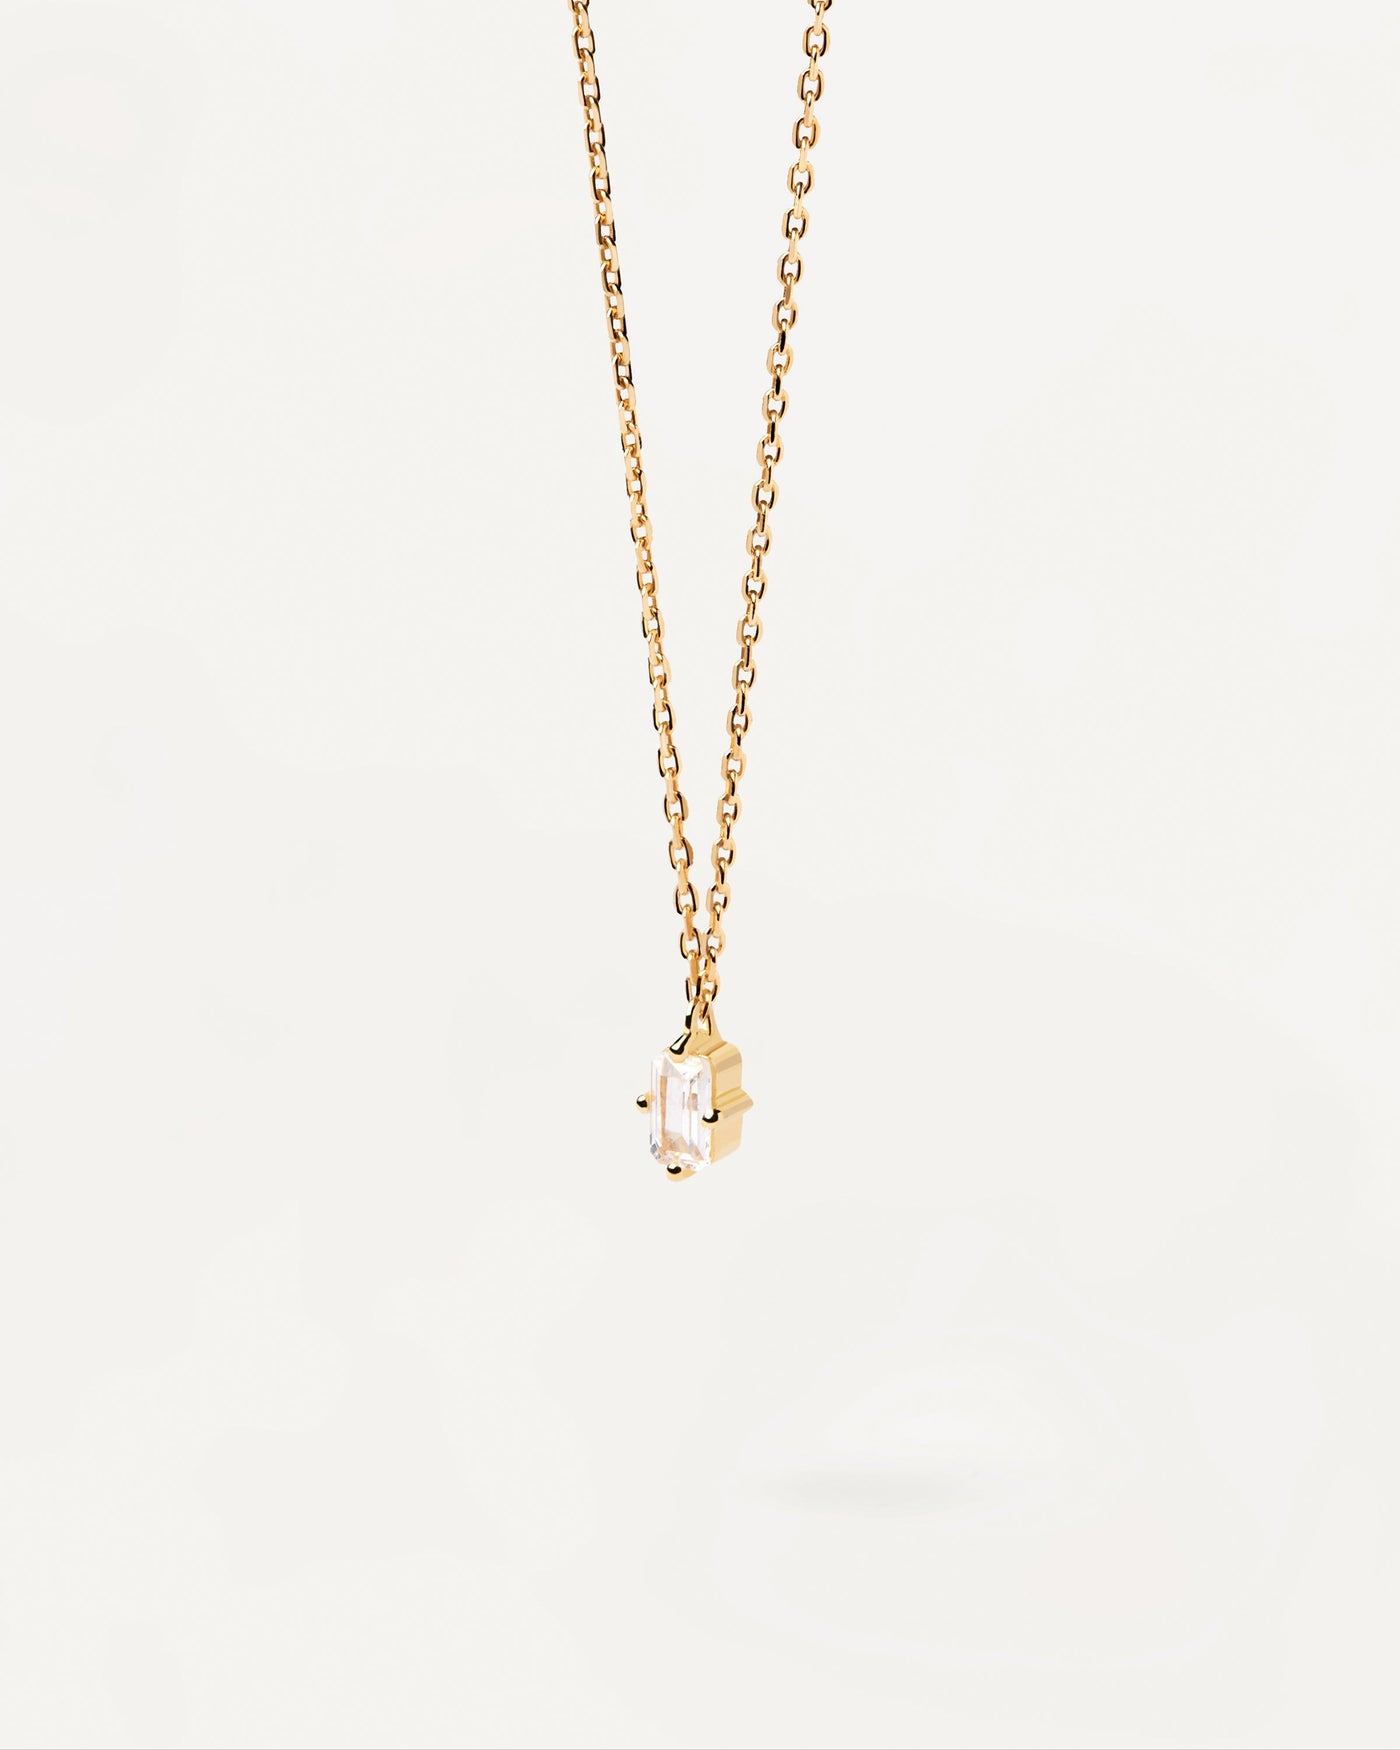 2023 Selection | Mia Necklace. Basic gold-plated solitaire necklace with cushioned zirconia. Get the latest arrival from PDPAOLA. Place your order safely and get this Best Seller. Free Shipping.